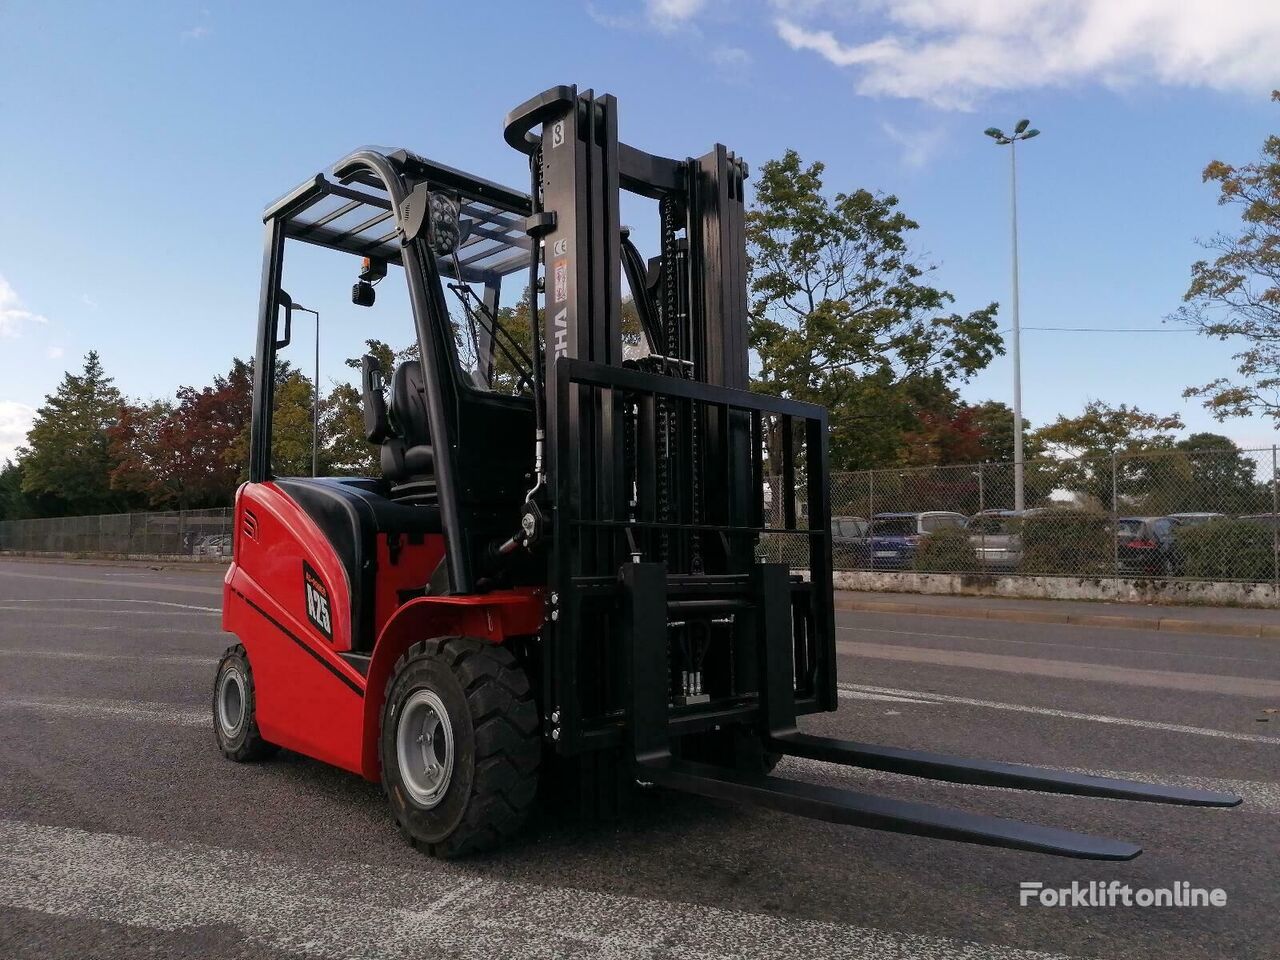 Hangcha A4W25 electric forklift